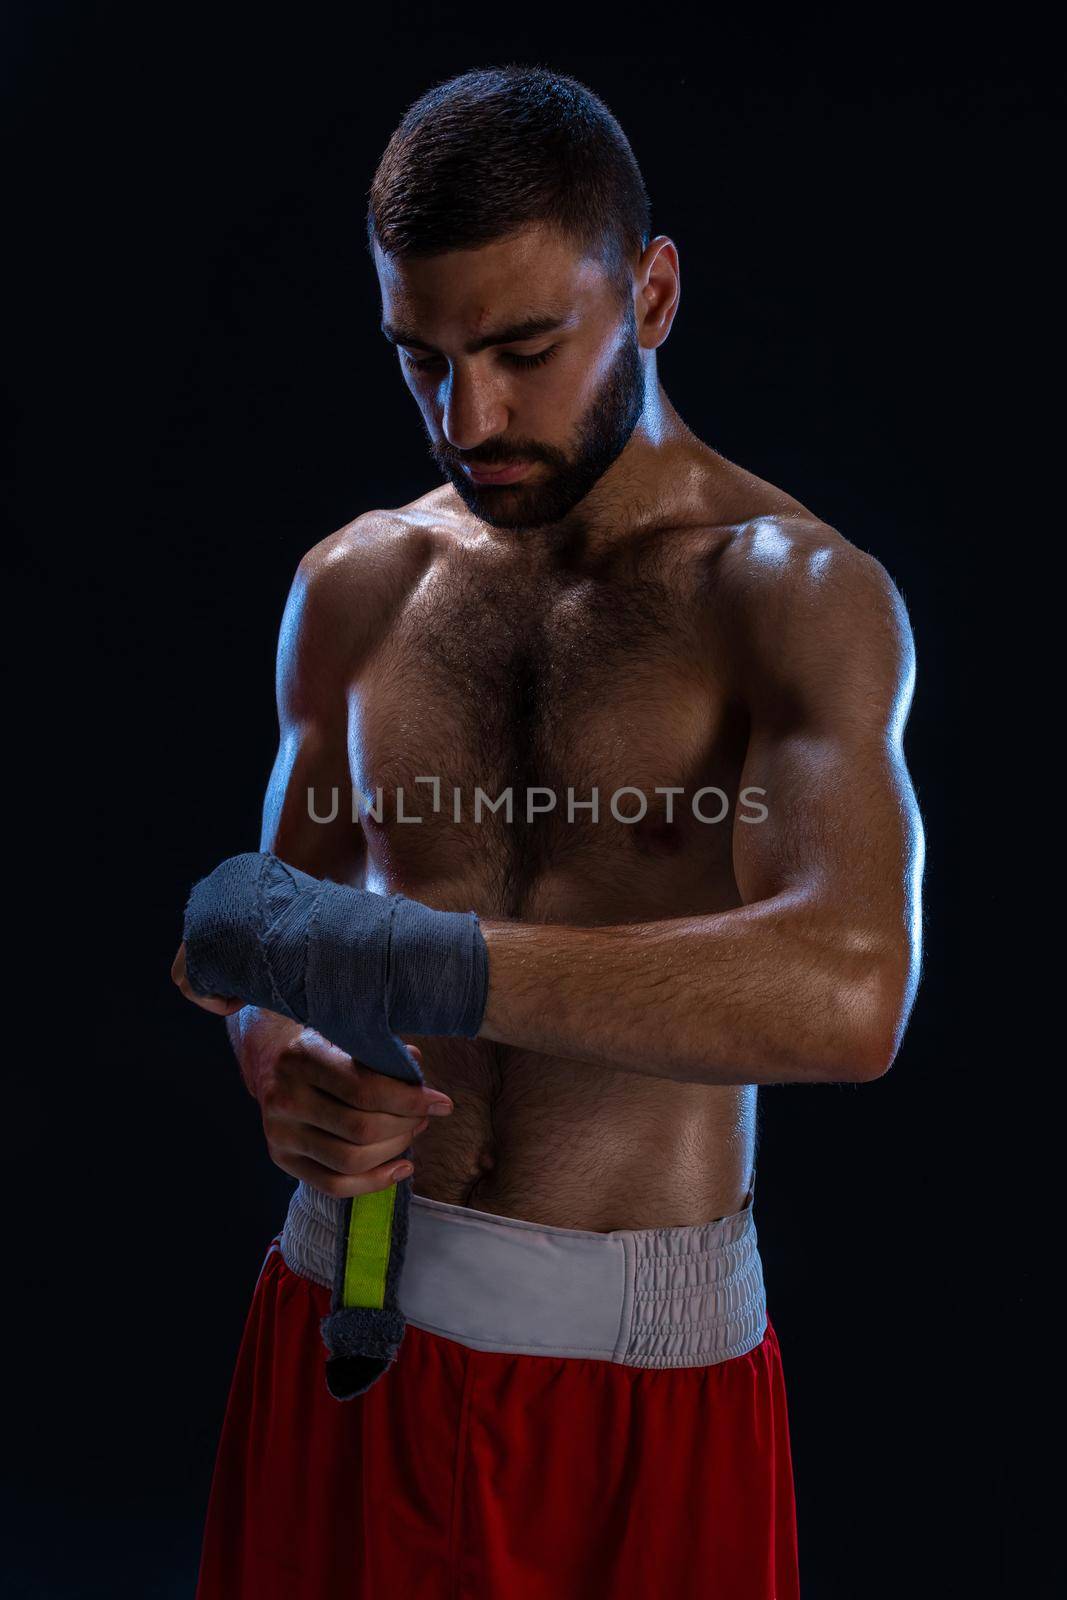 Sports boxer man pulls on the hand wrist wraps. Oriental male model isolated on black background. Athletic man posing in red shorts without shirt